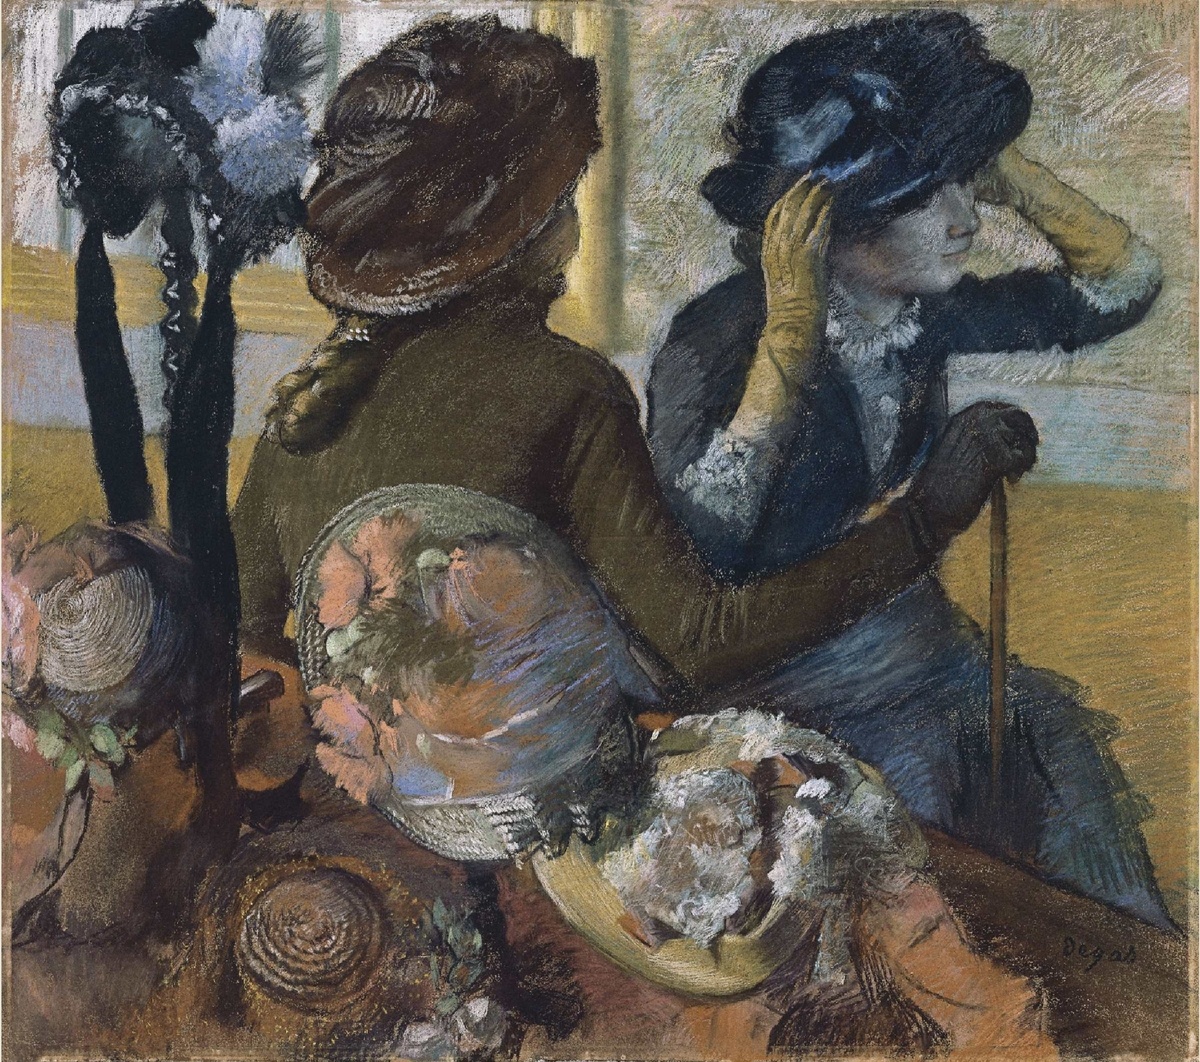 Edgar Degas's At the Milliner's (1882) famous painting. Original from Wikimedia Commons